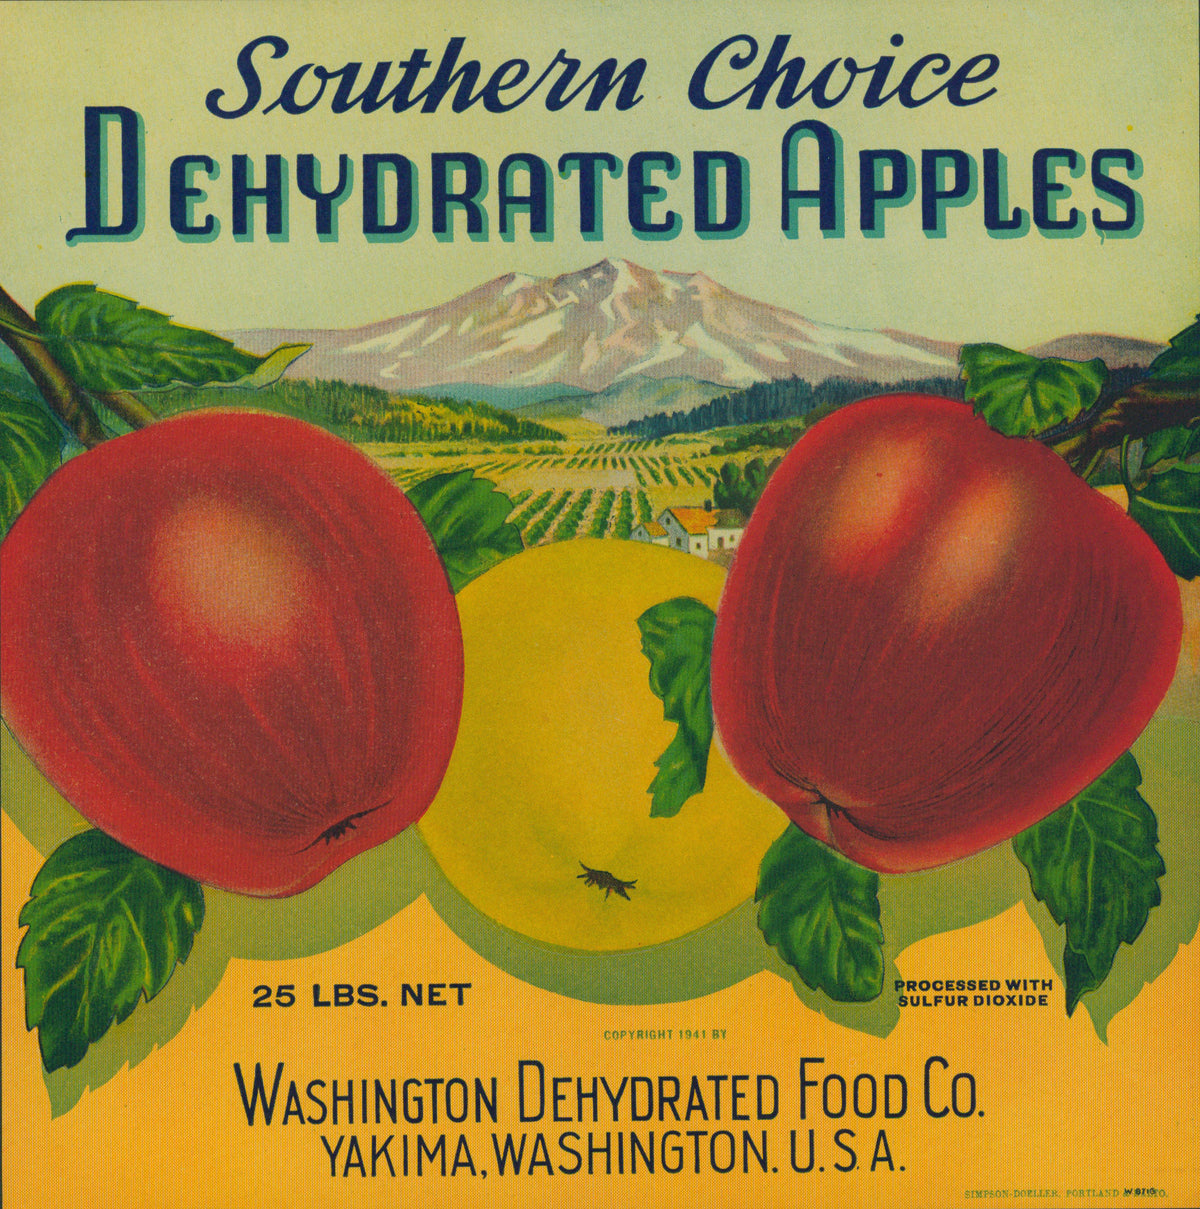 Southern Choice Dehydrated Apples- Crate Label - Authentic Vintage Antique Print